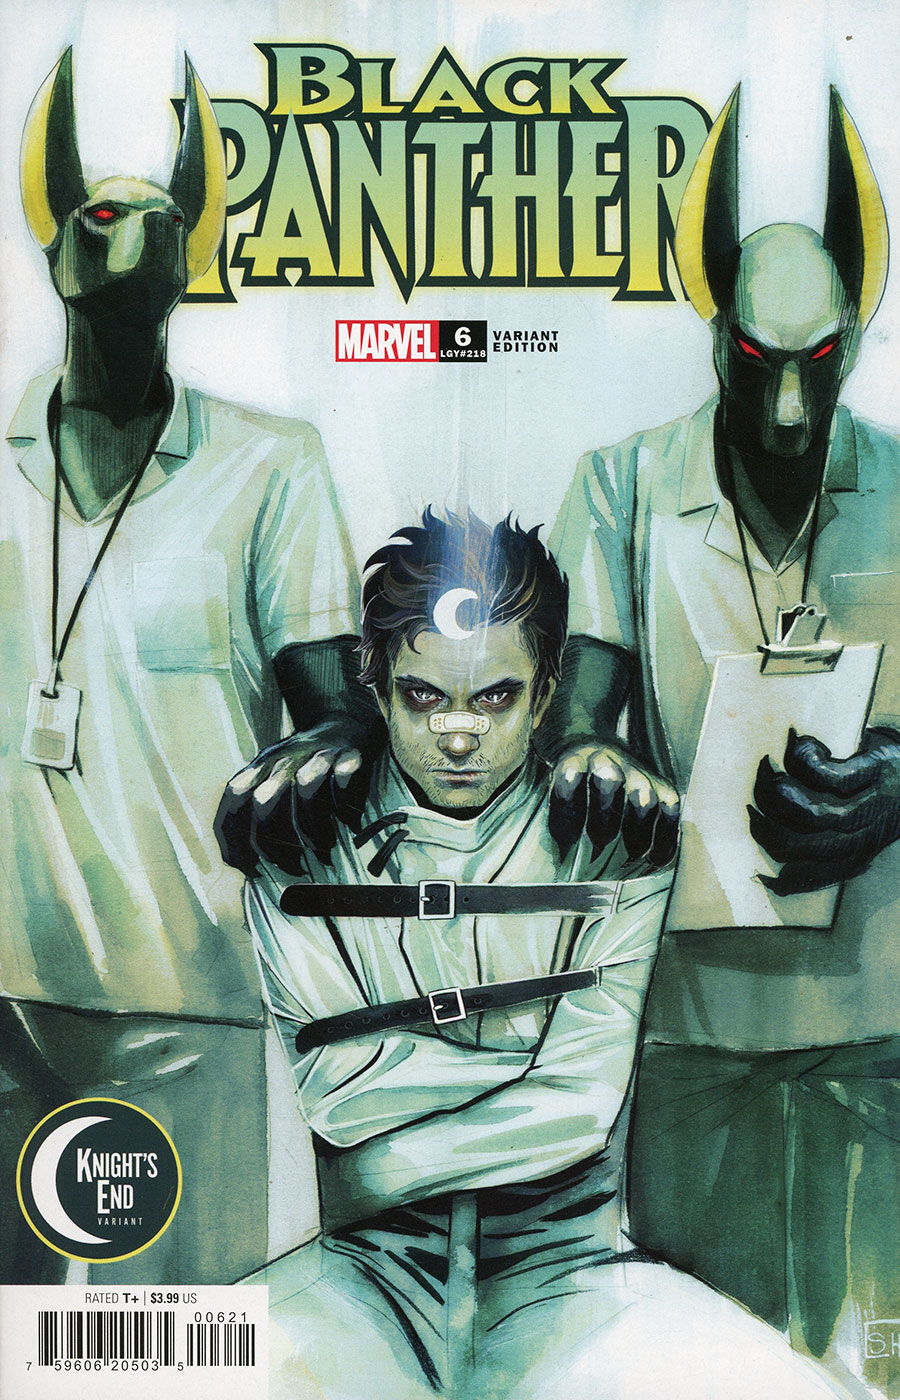 Black Panther Vol 9 #6 Cover B Variant Stephanie Hans Knights End Cover (Limit 1 Per Customer)